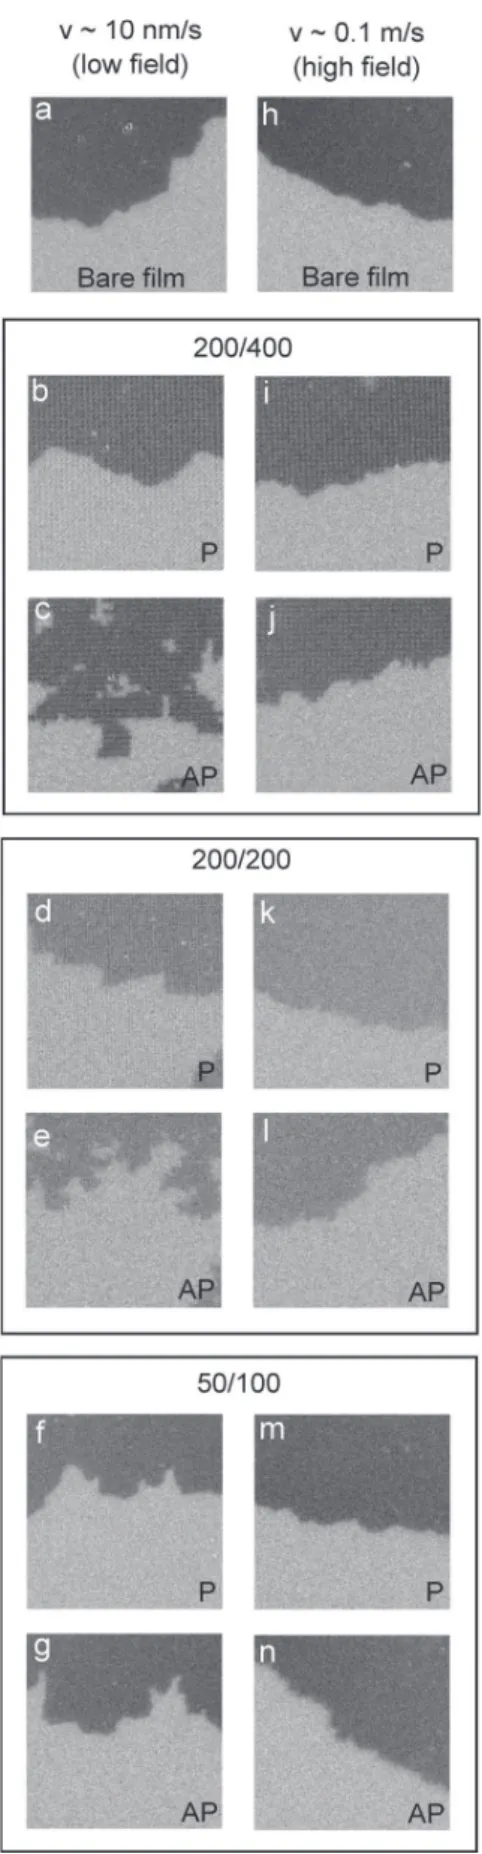 FIG. 4. Stabilized domains in the continuous ferromagnetic layer outside (a,h) and beneath the 200/400 (b,c,i,j), 200/200 (d,e,k,l), and 50/100 (f,g,m,n) arrays following wall propagation under fields parallel (P) or  anti-parallel (AP) to the magnetizatio